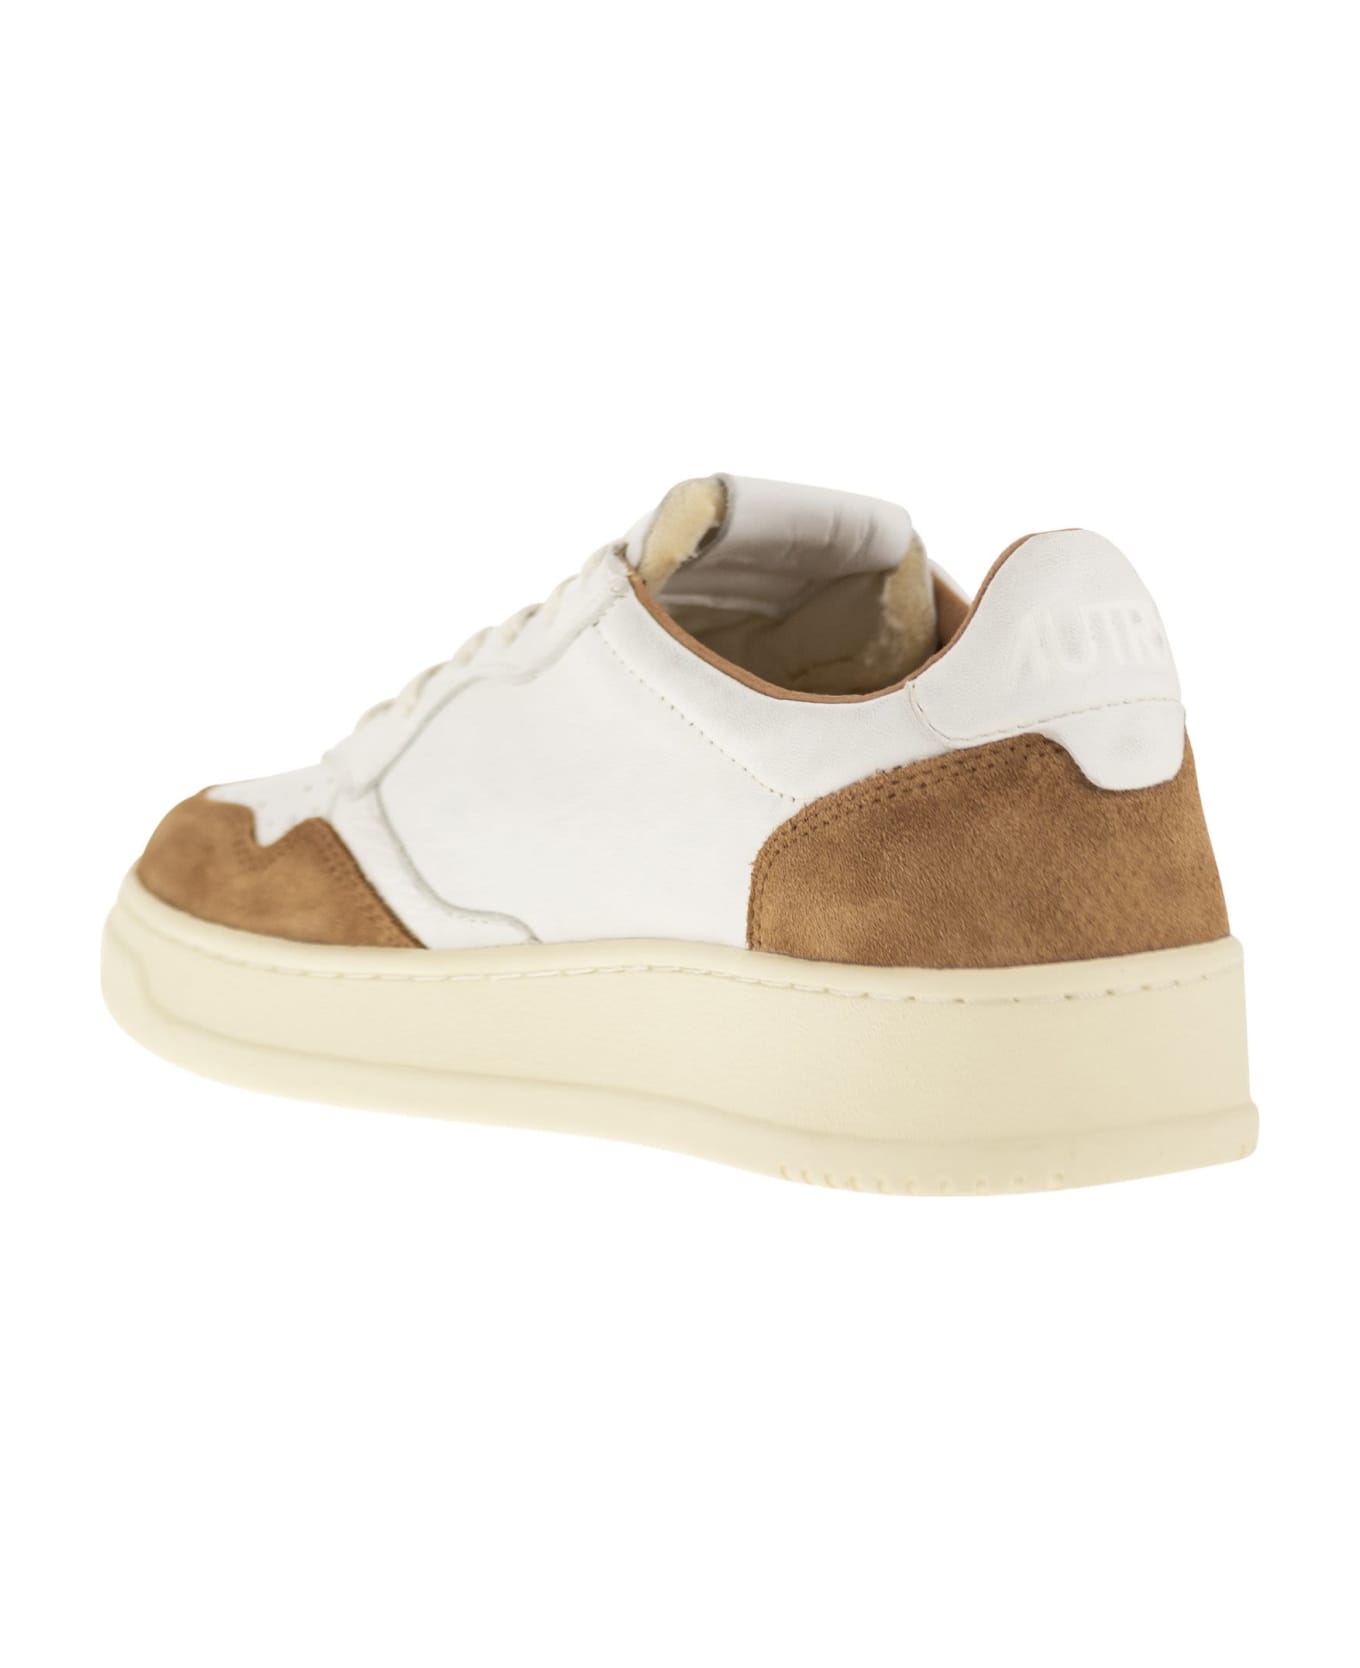 Autry Medalist Low Sneakers - White/caramel